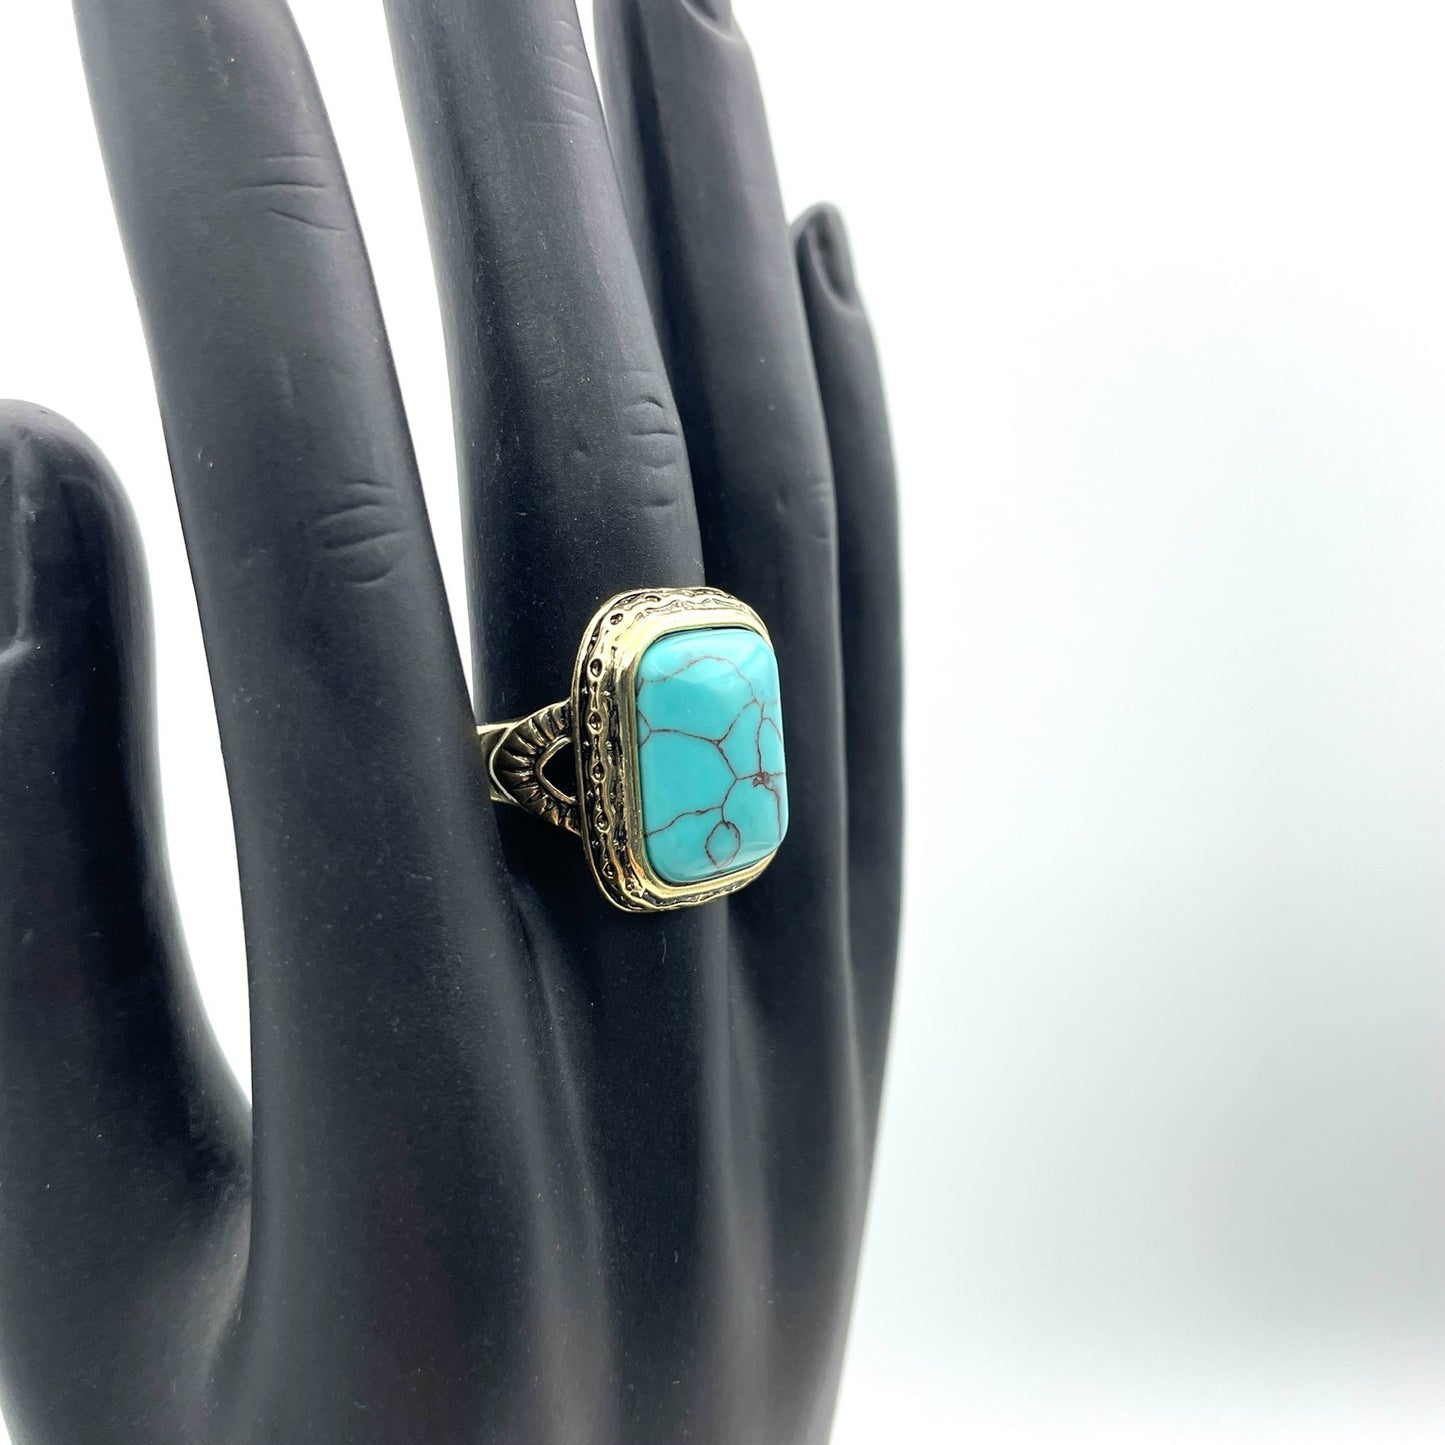 Turquoise Cocktail Ring - Size 8.25